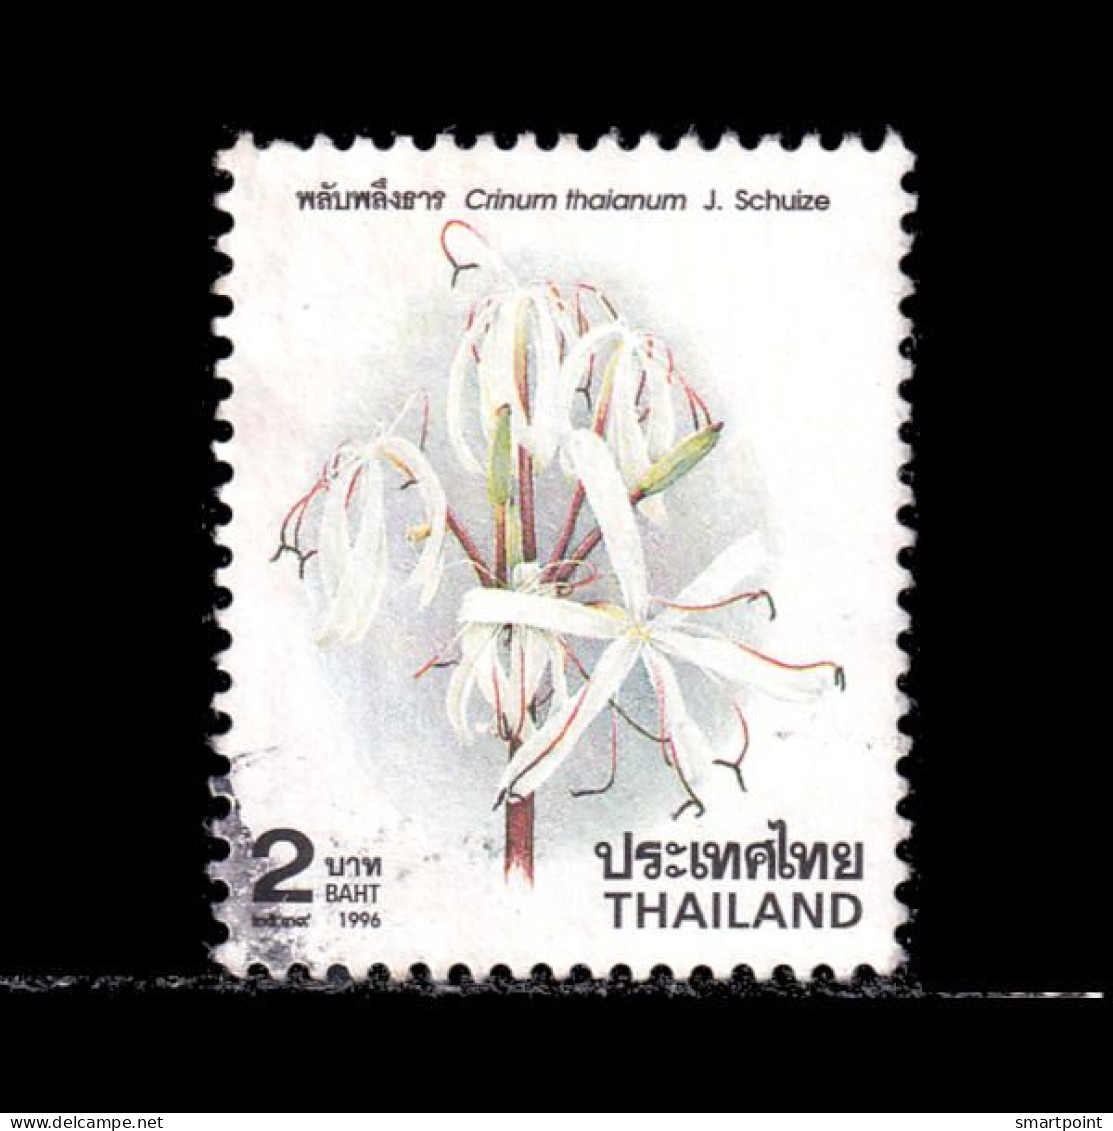 Thailand Stamp 1996 1997 New Year (9th Series) 2 Baht - Used - Thailand